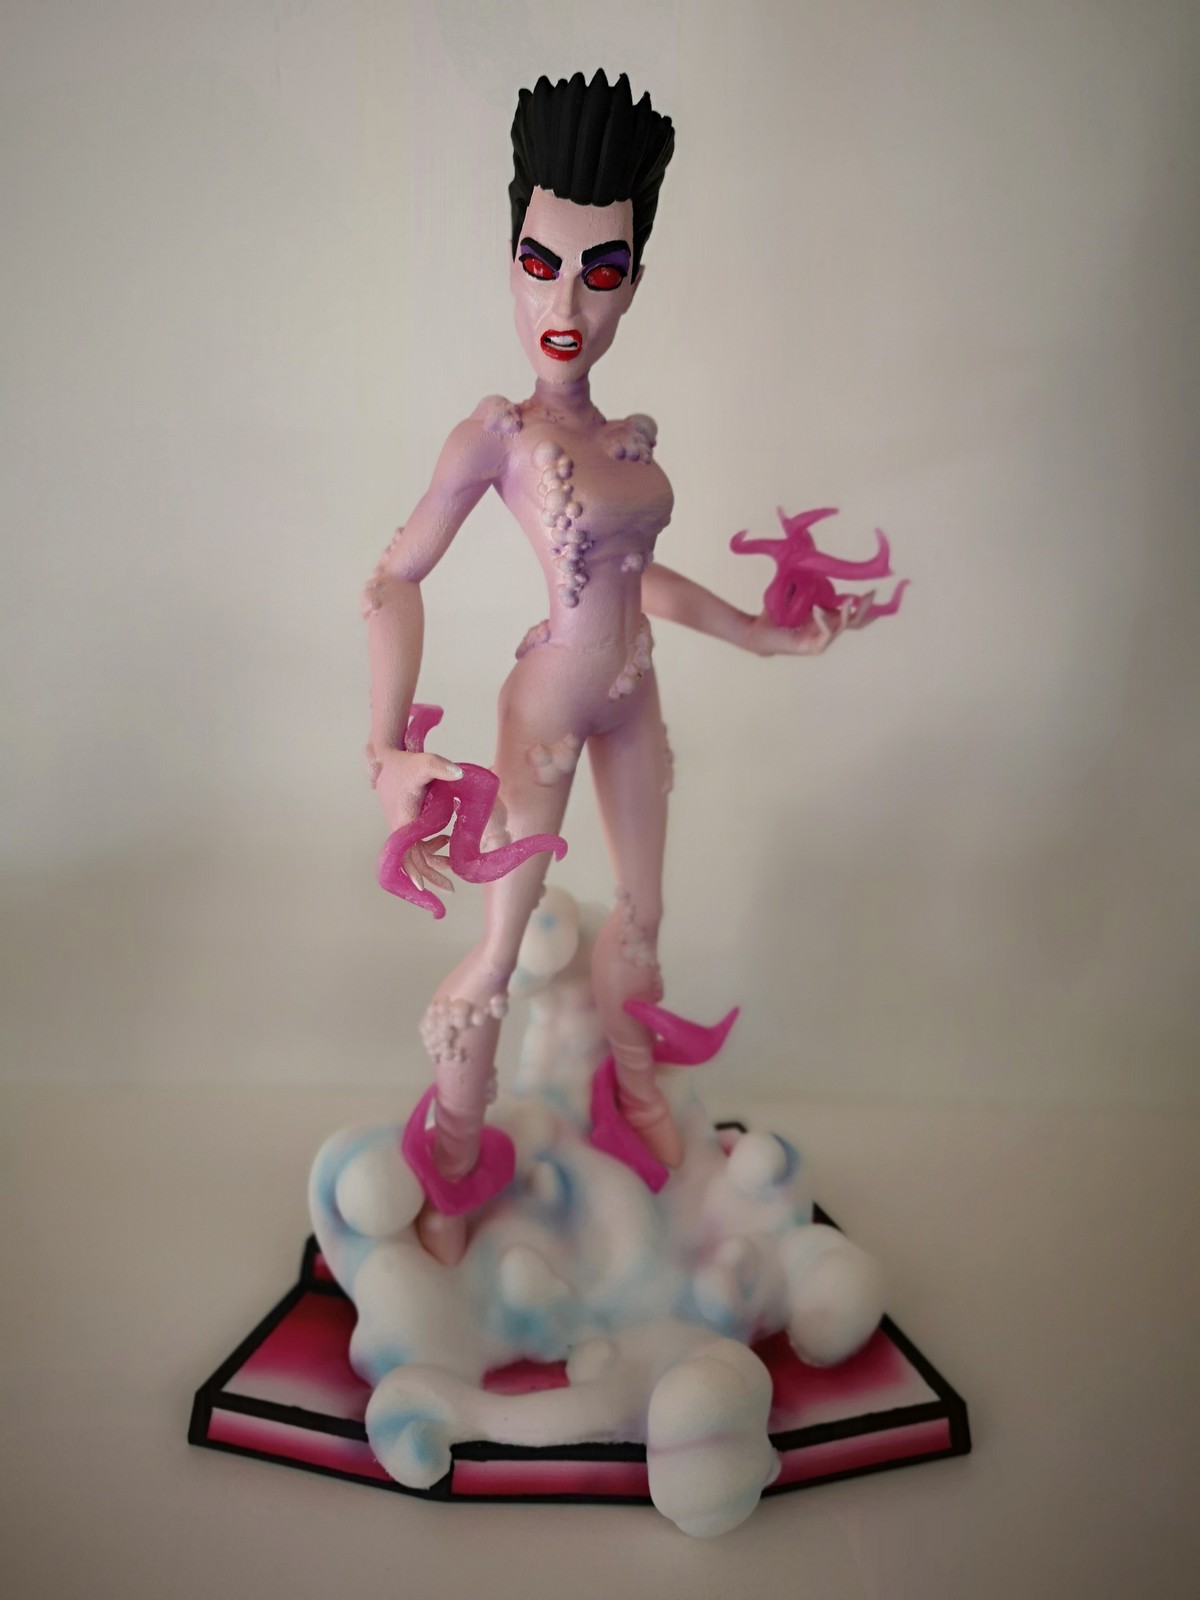 15" gozer made for the Toy Think tank artshow.
Currently up for sale - http://toythinktank.co.uk/product/gozer-by-caitlin-sculpts/